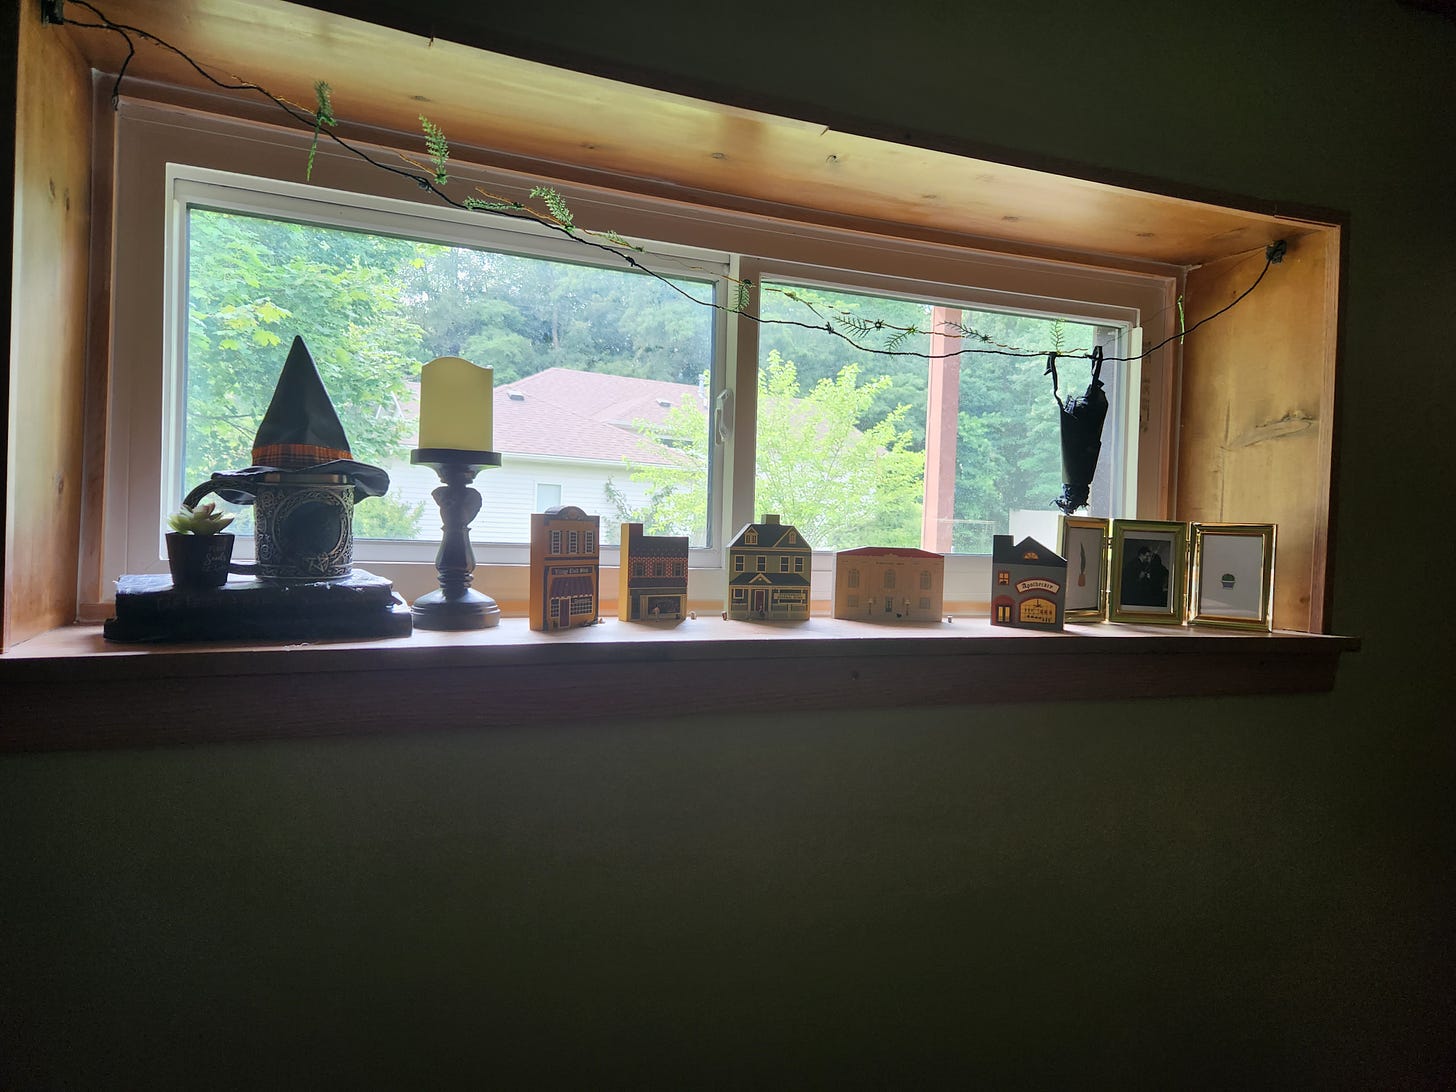 A huanted window display in Kandi's kitchen. A hanging bat, a spooky mug, a haunted village, old spell books, a witch's hat, a candle holder in the shape of a crow, and a picture frame with Gomez and Morticia are all present.